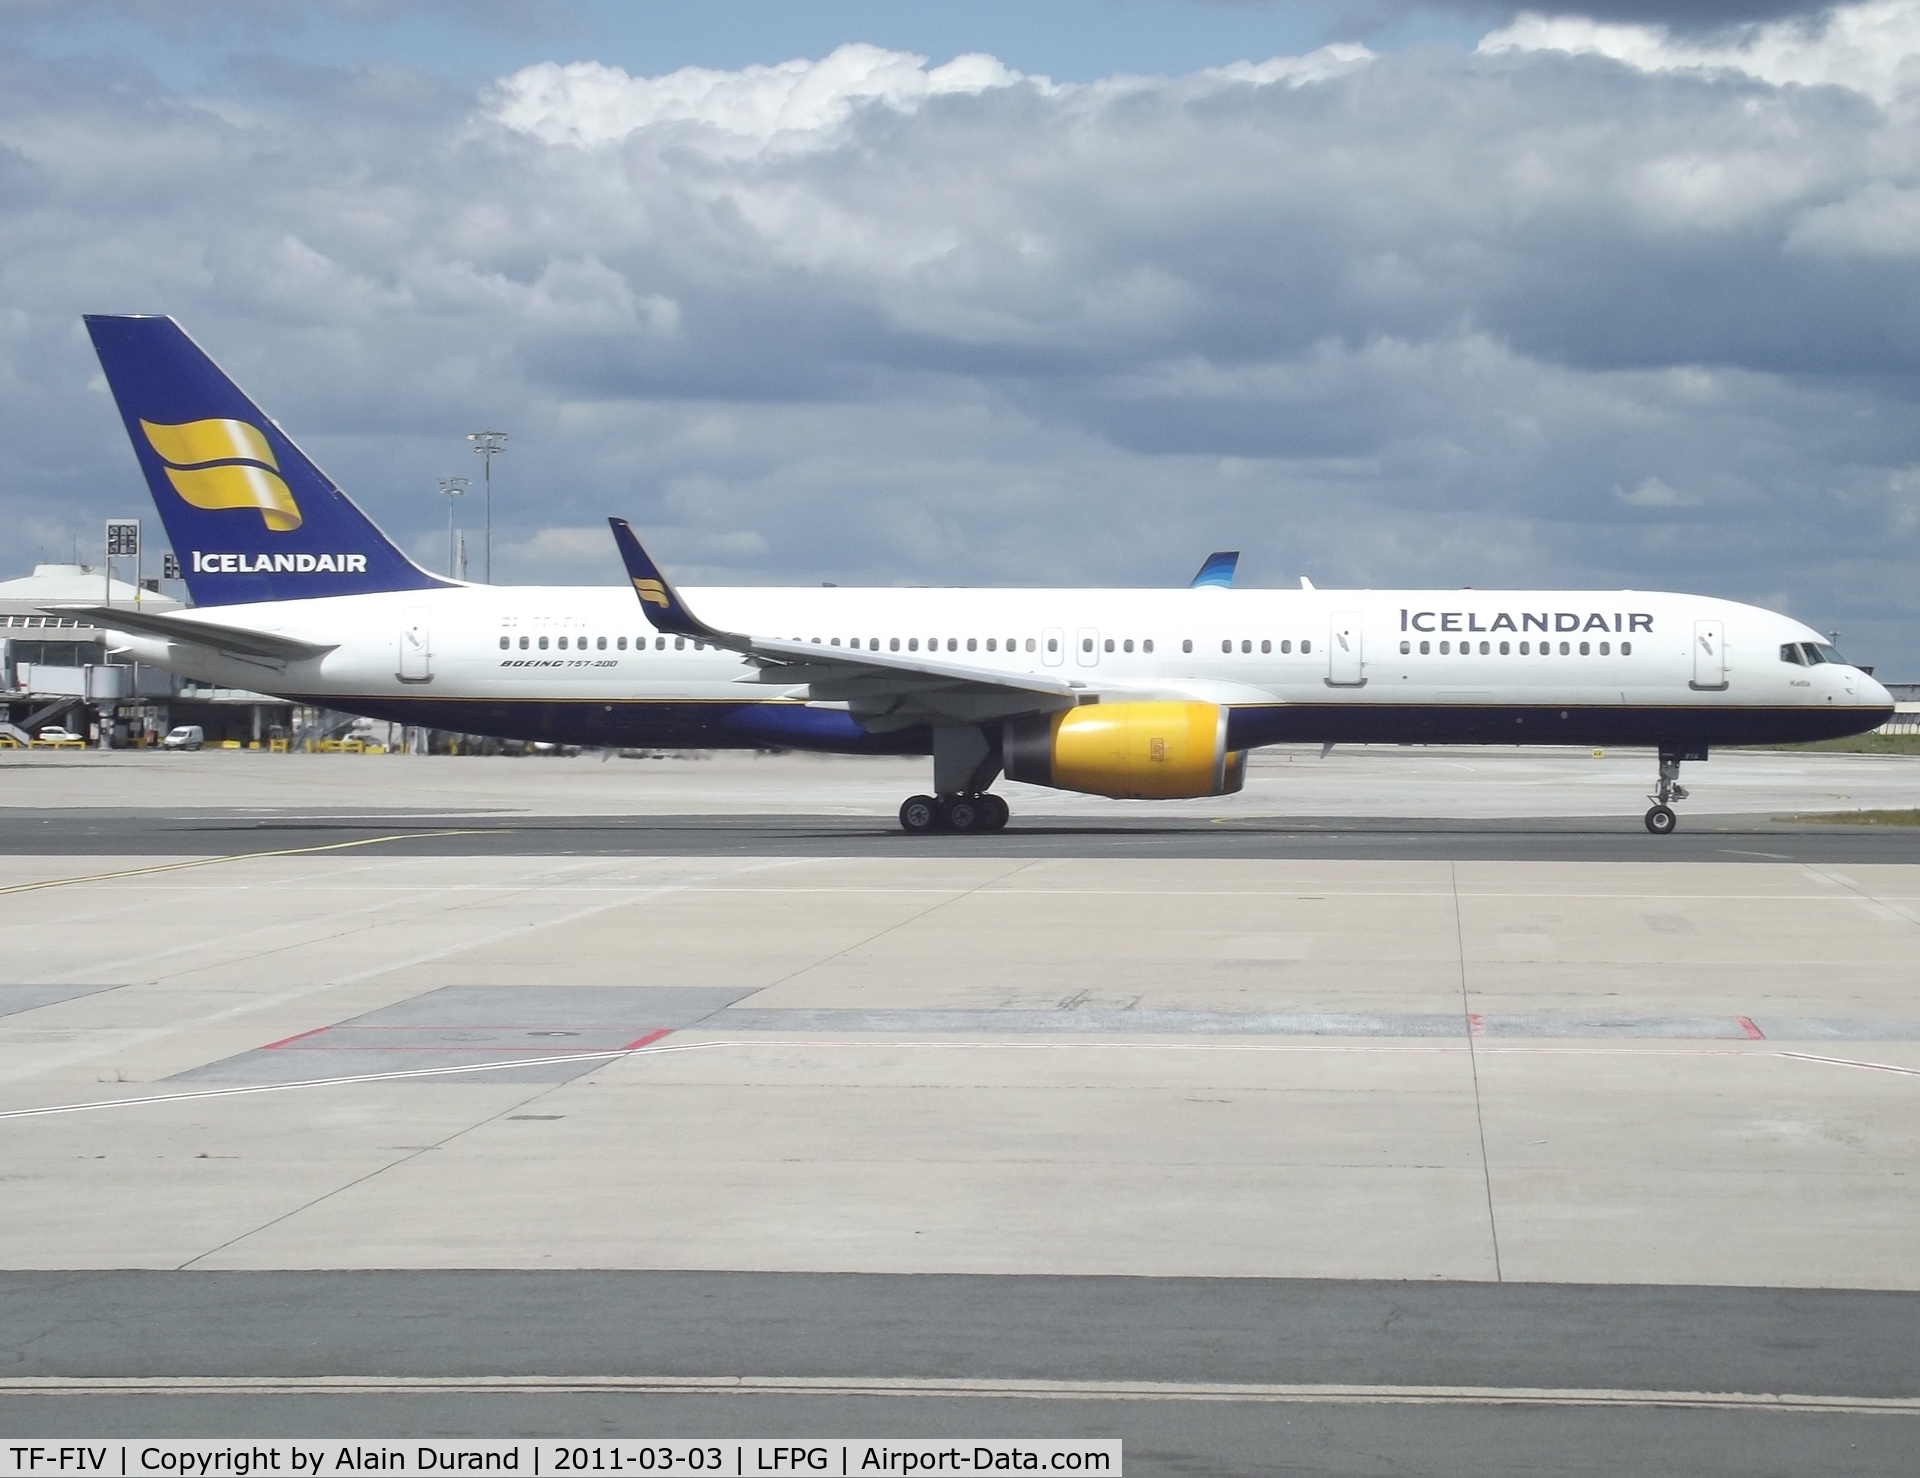 TF-FIV, 2001 Boeing 757-208 C/N 30424, as with the overwhelming majority of passenger configurated Seven-Fives in Icelandair fleets, # 956 can accomodate 22 guests in Saga business class and 167 fellow travellers in economy